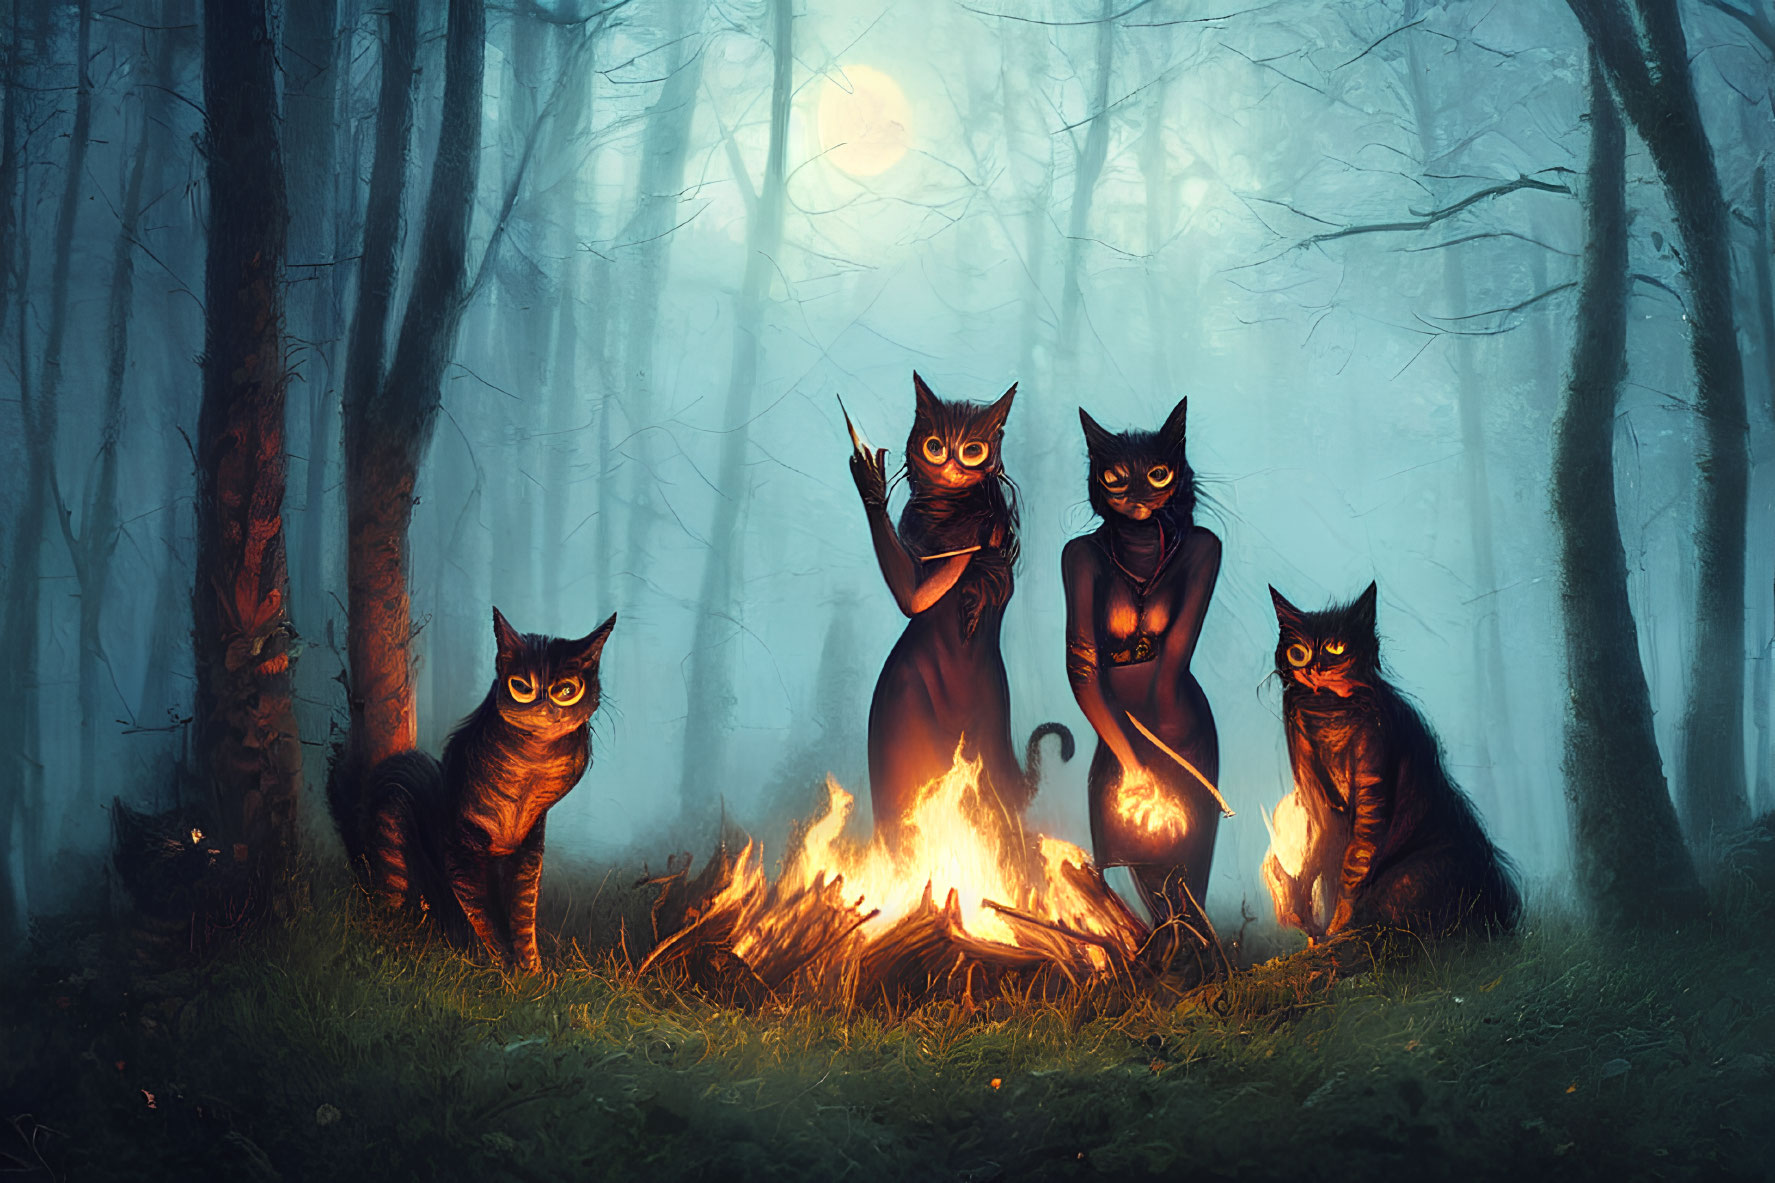 Stylized black cats with glowing eyes around a campfire in misty forest